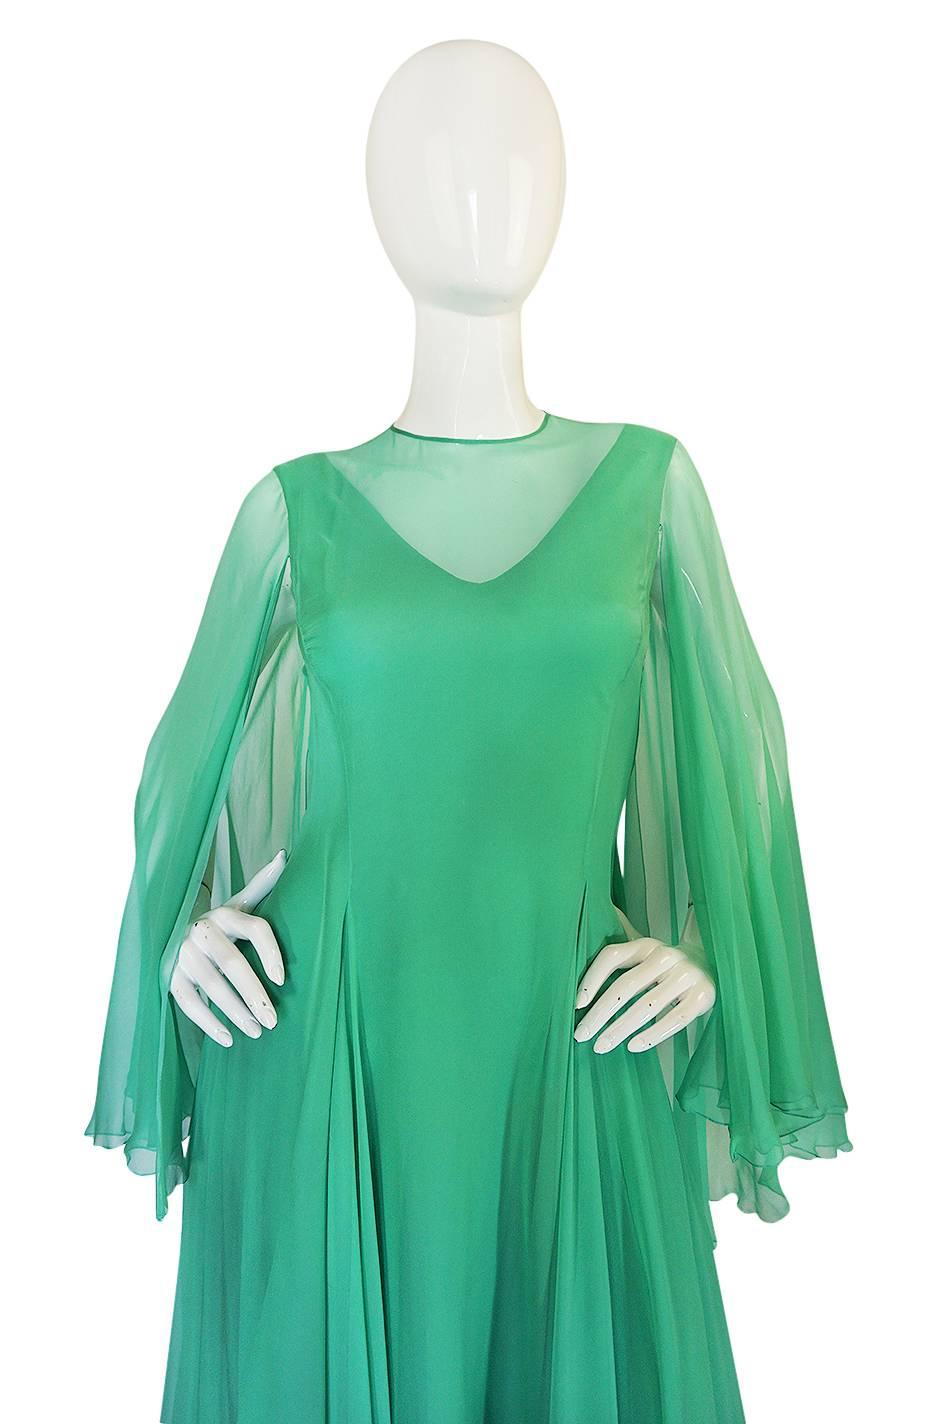 Blue 1970s Stavropoulos Couture Romantic Layered Silk Chiffon Dress